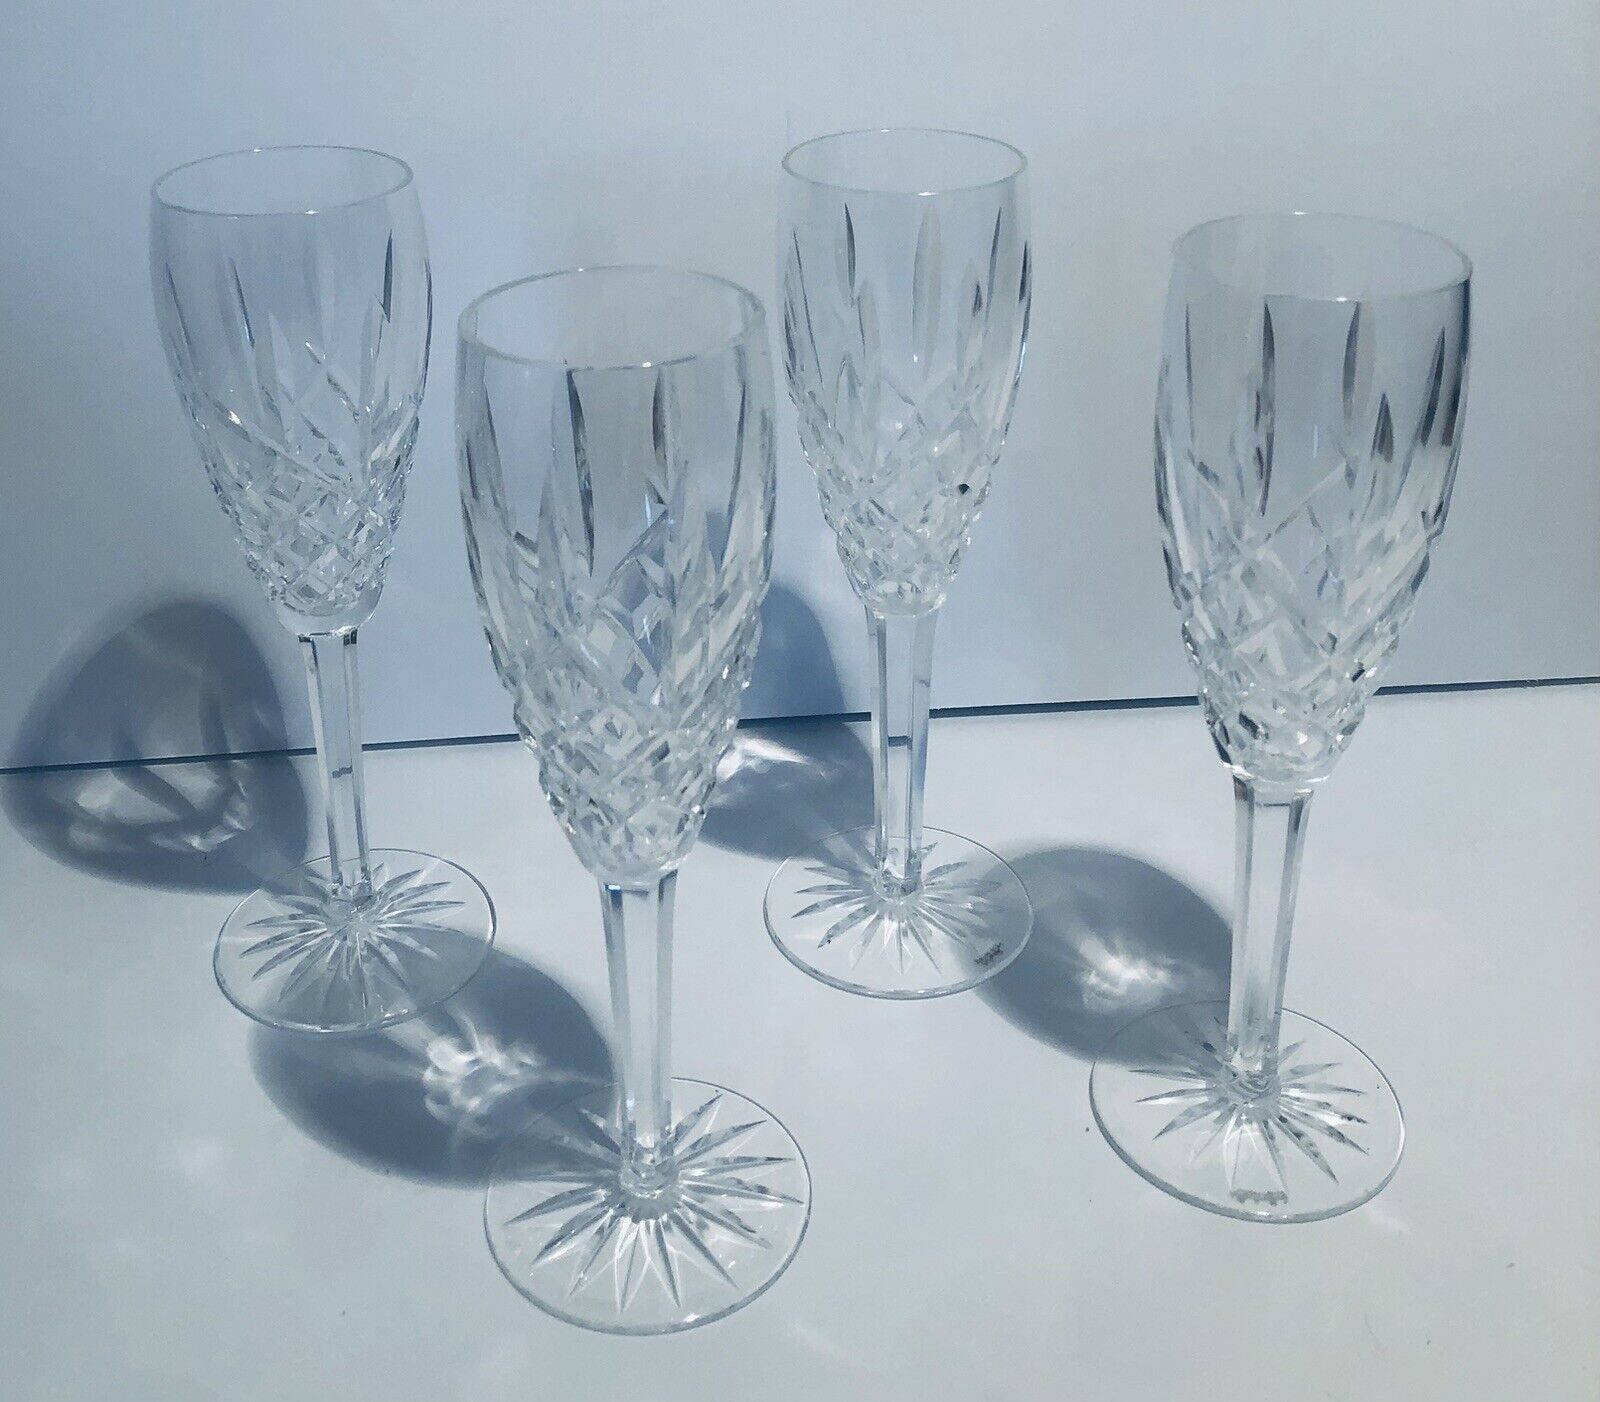 4 WATERFORD ARAGLIN FLUTE CHAMPAGNE Crystal Glasses Product of Ireland Vtg 8.5”